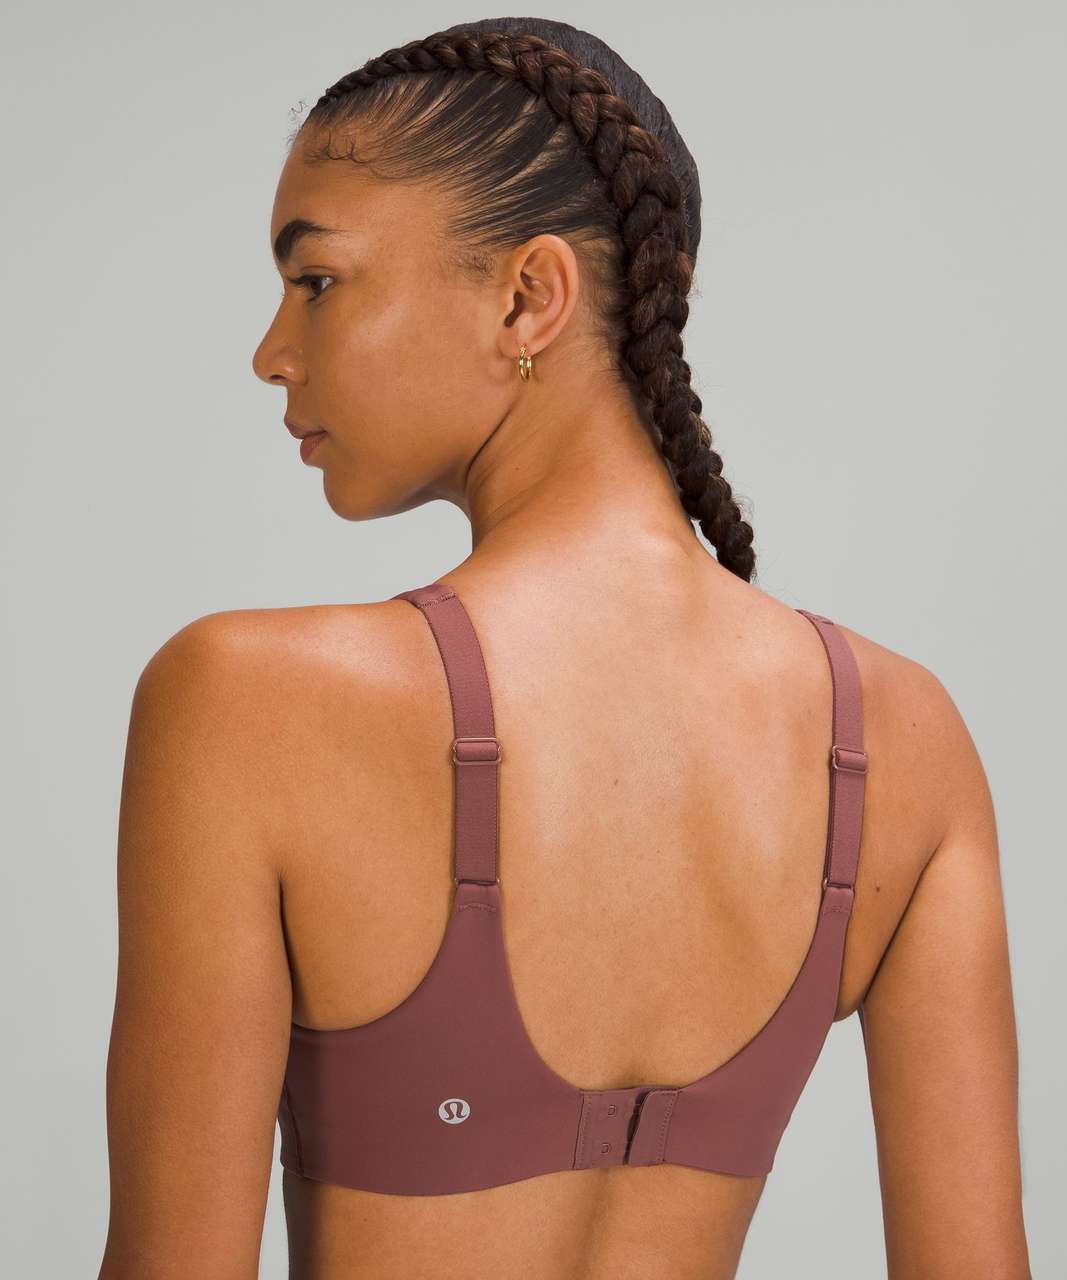 Lululemon In Alignment Straight-Strap Bra *Light Support, C/D Cup - Smoky Topaz